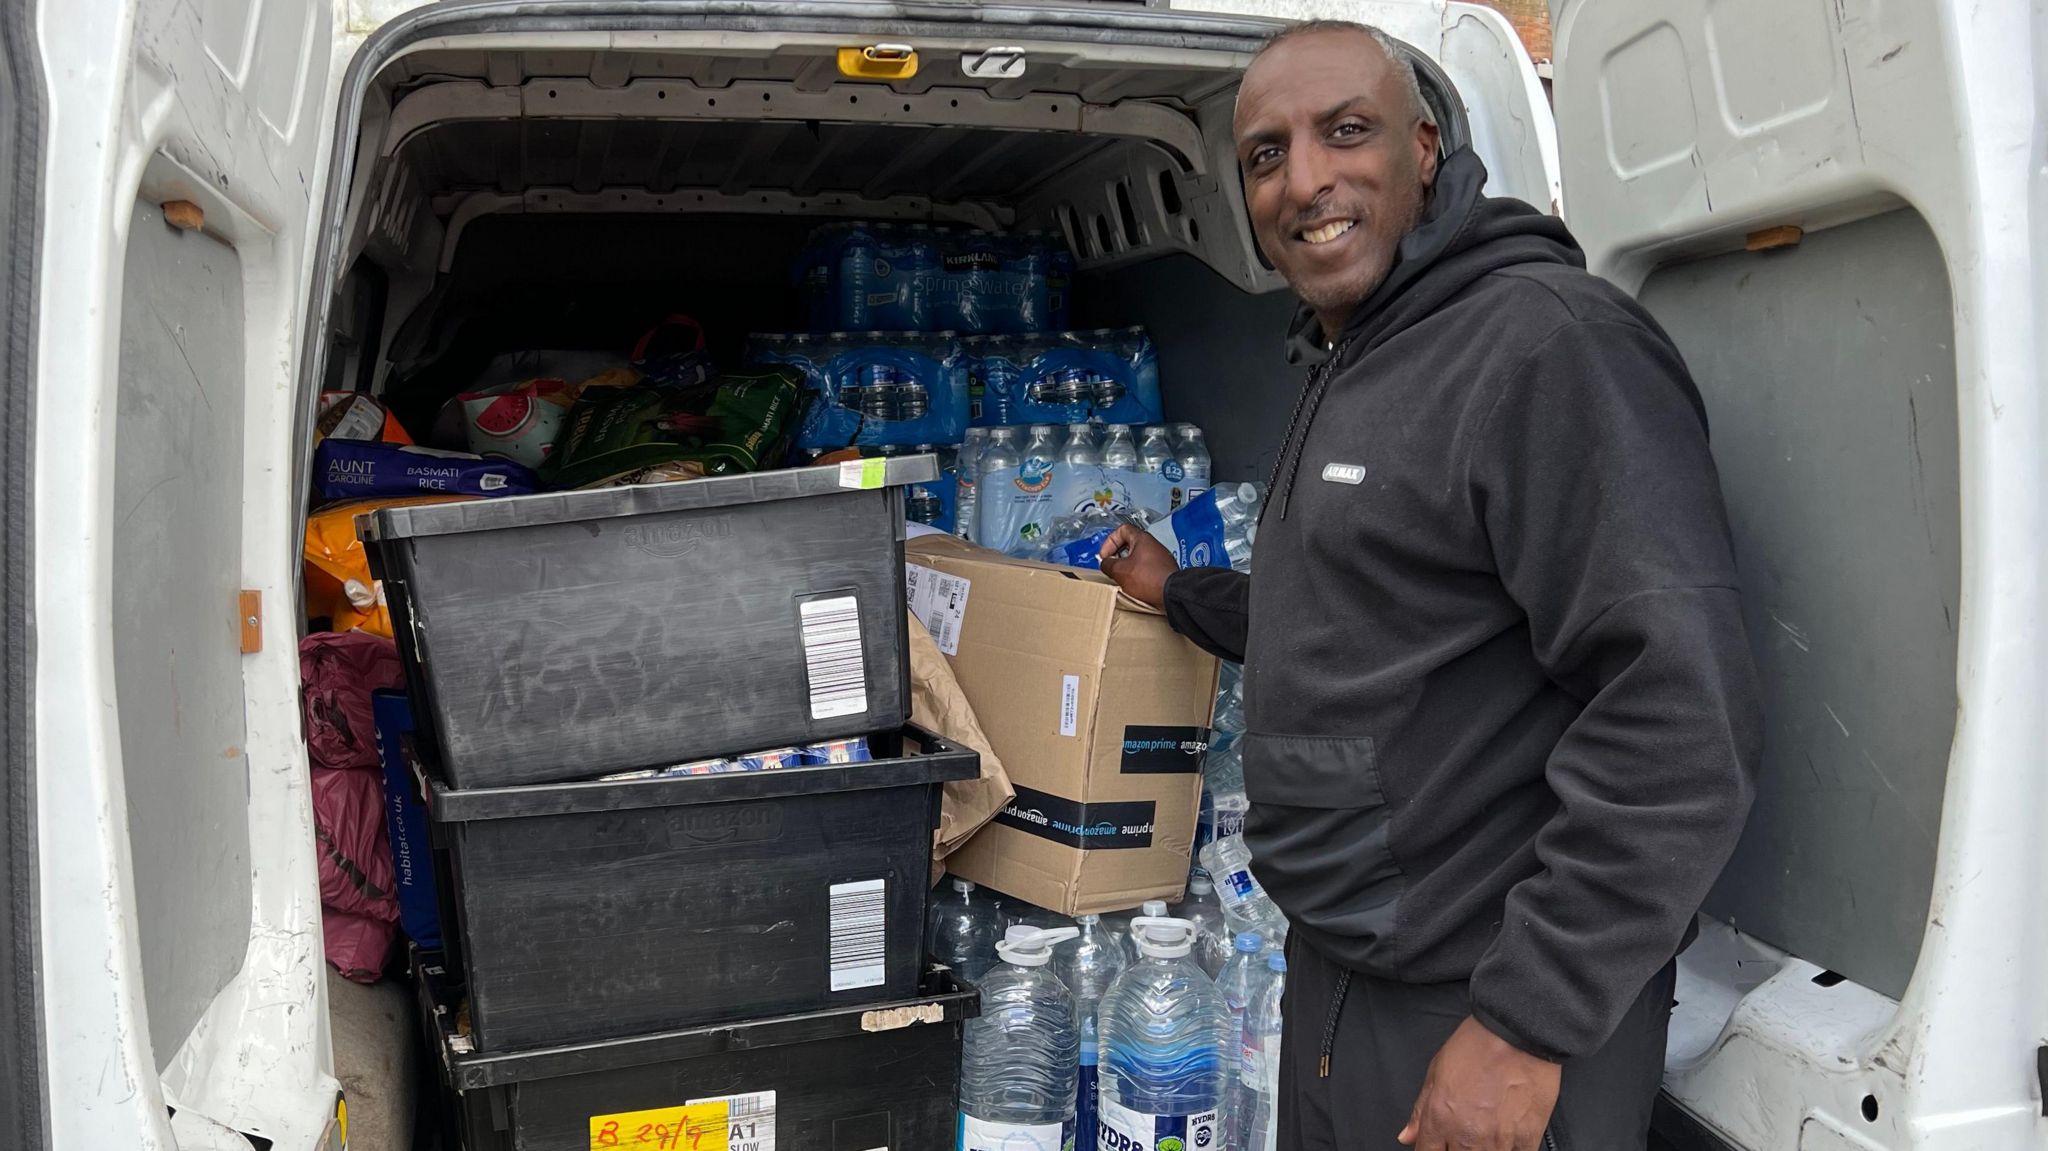 Orson De Silva, one of the aid organisers wearing a black jersey hoodie, with the supplies being gathered in Ladbroke Grove. He is standing by the back of a van full of boxes and water bottles